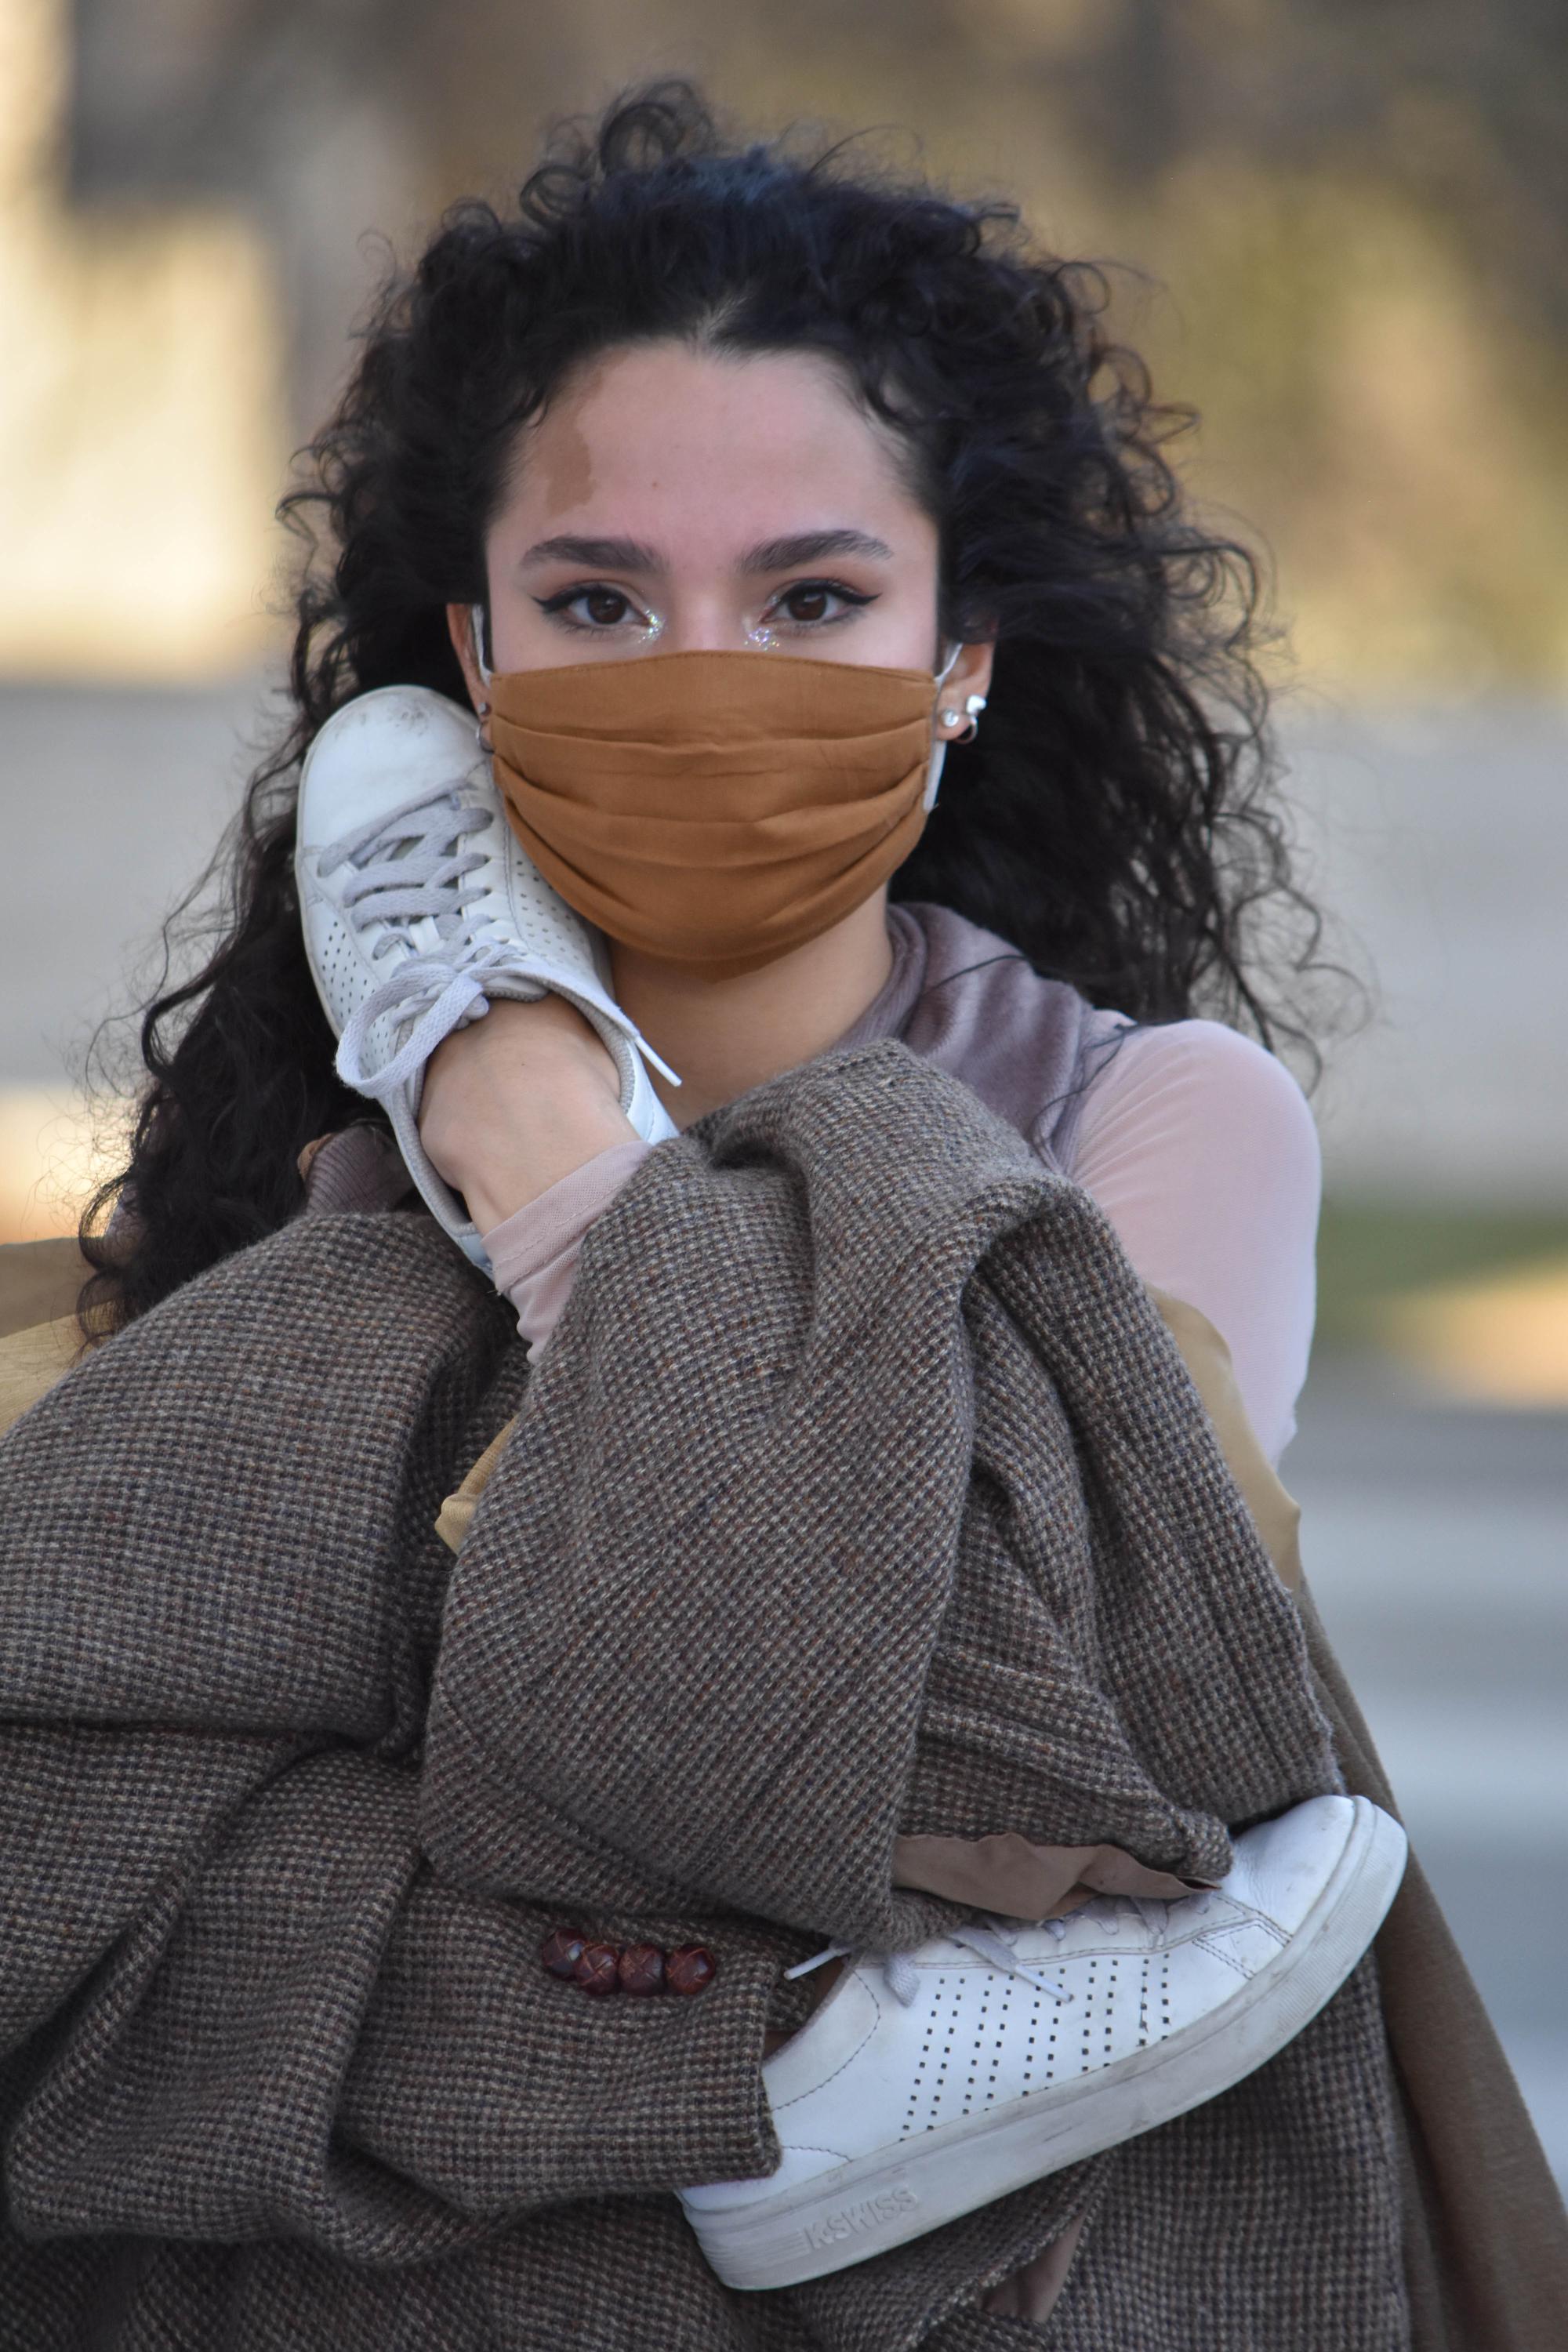 dancer with dark, curly hair and a mask holds a blazer and her tennis shoes across her body